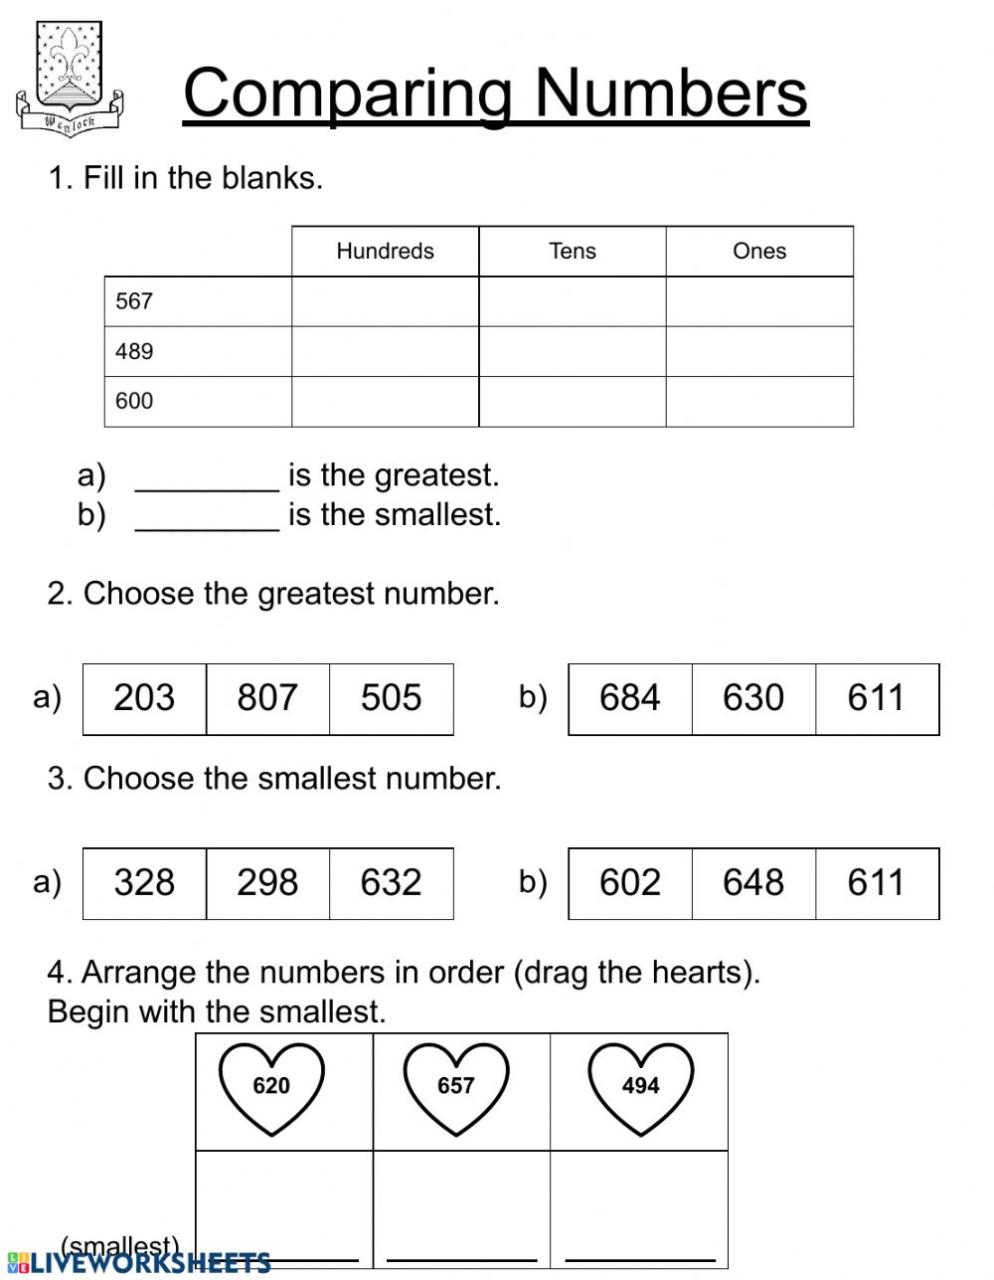 Comparing numbers Second Grade worksheet